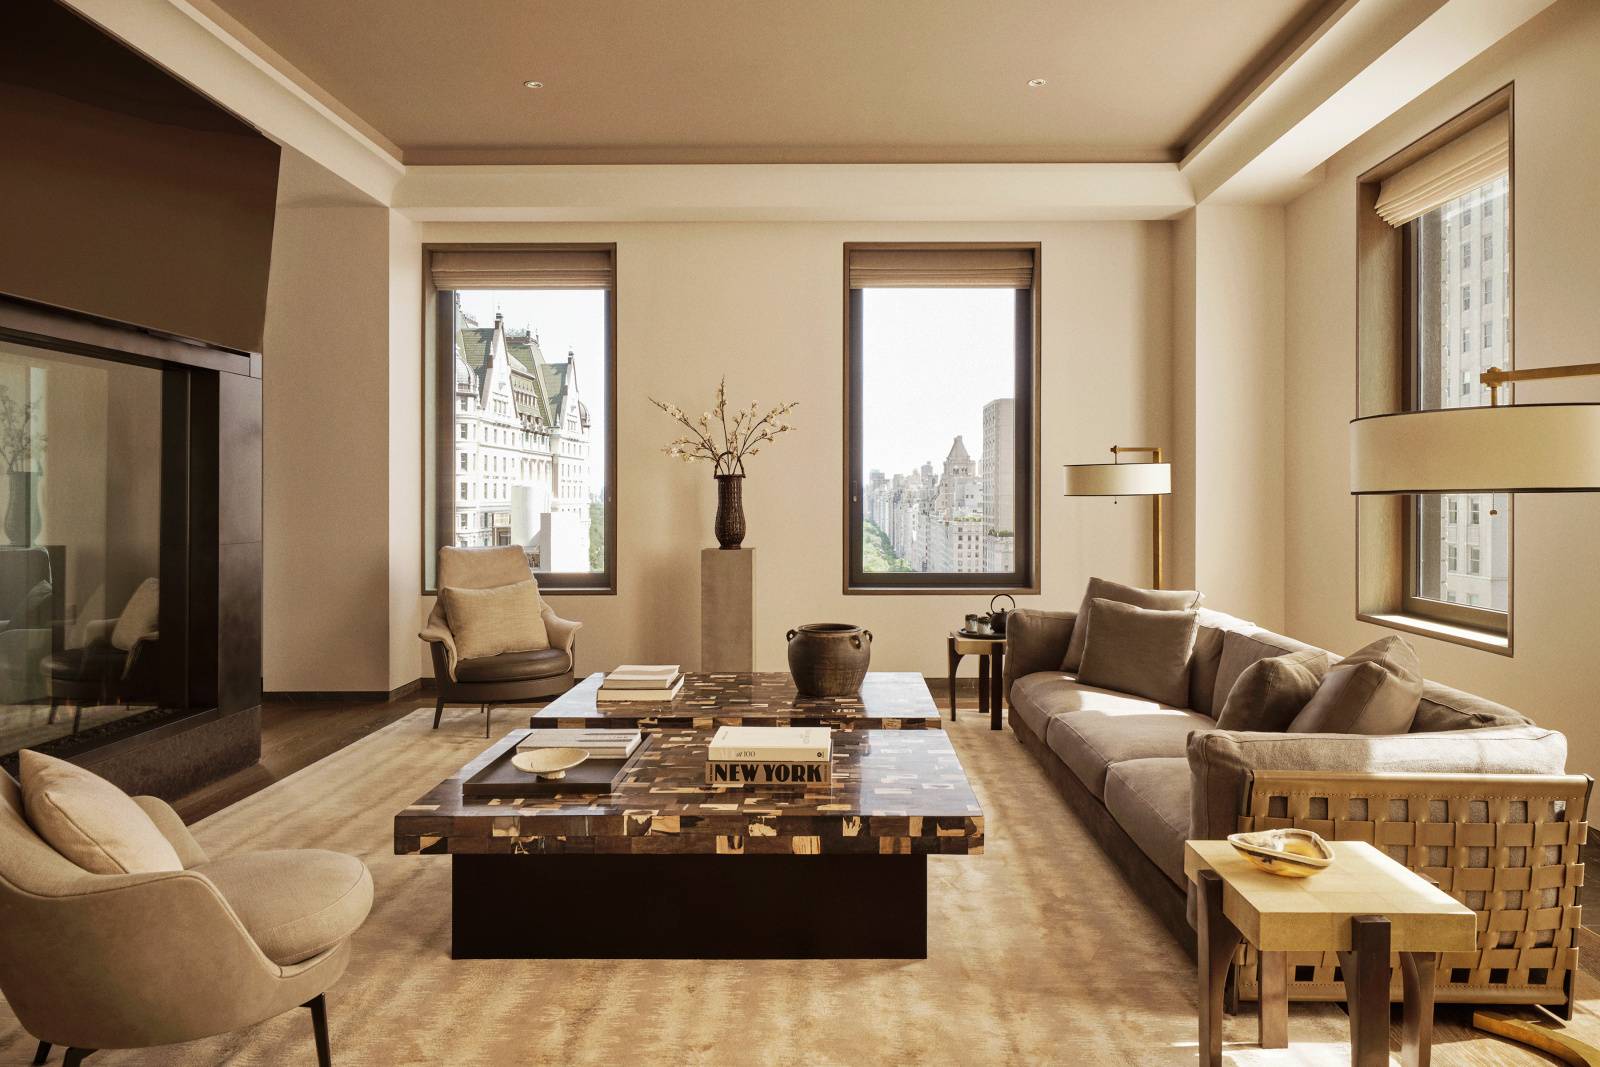 Situated on the 18th floor of Aman New York, this three bedroom branded and fully serviced residence offers expansive views of both the city and Central Park.